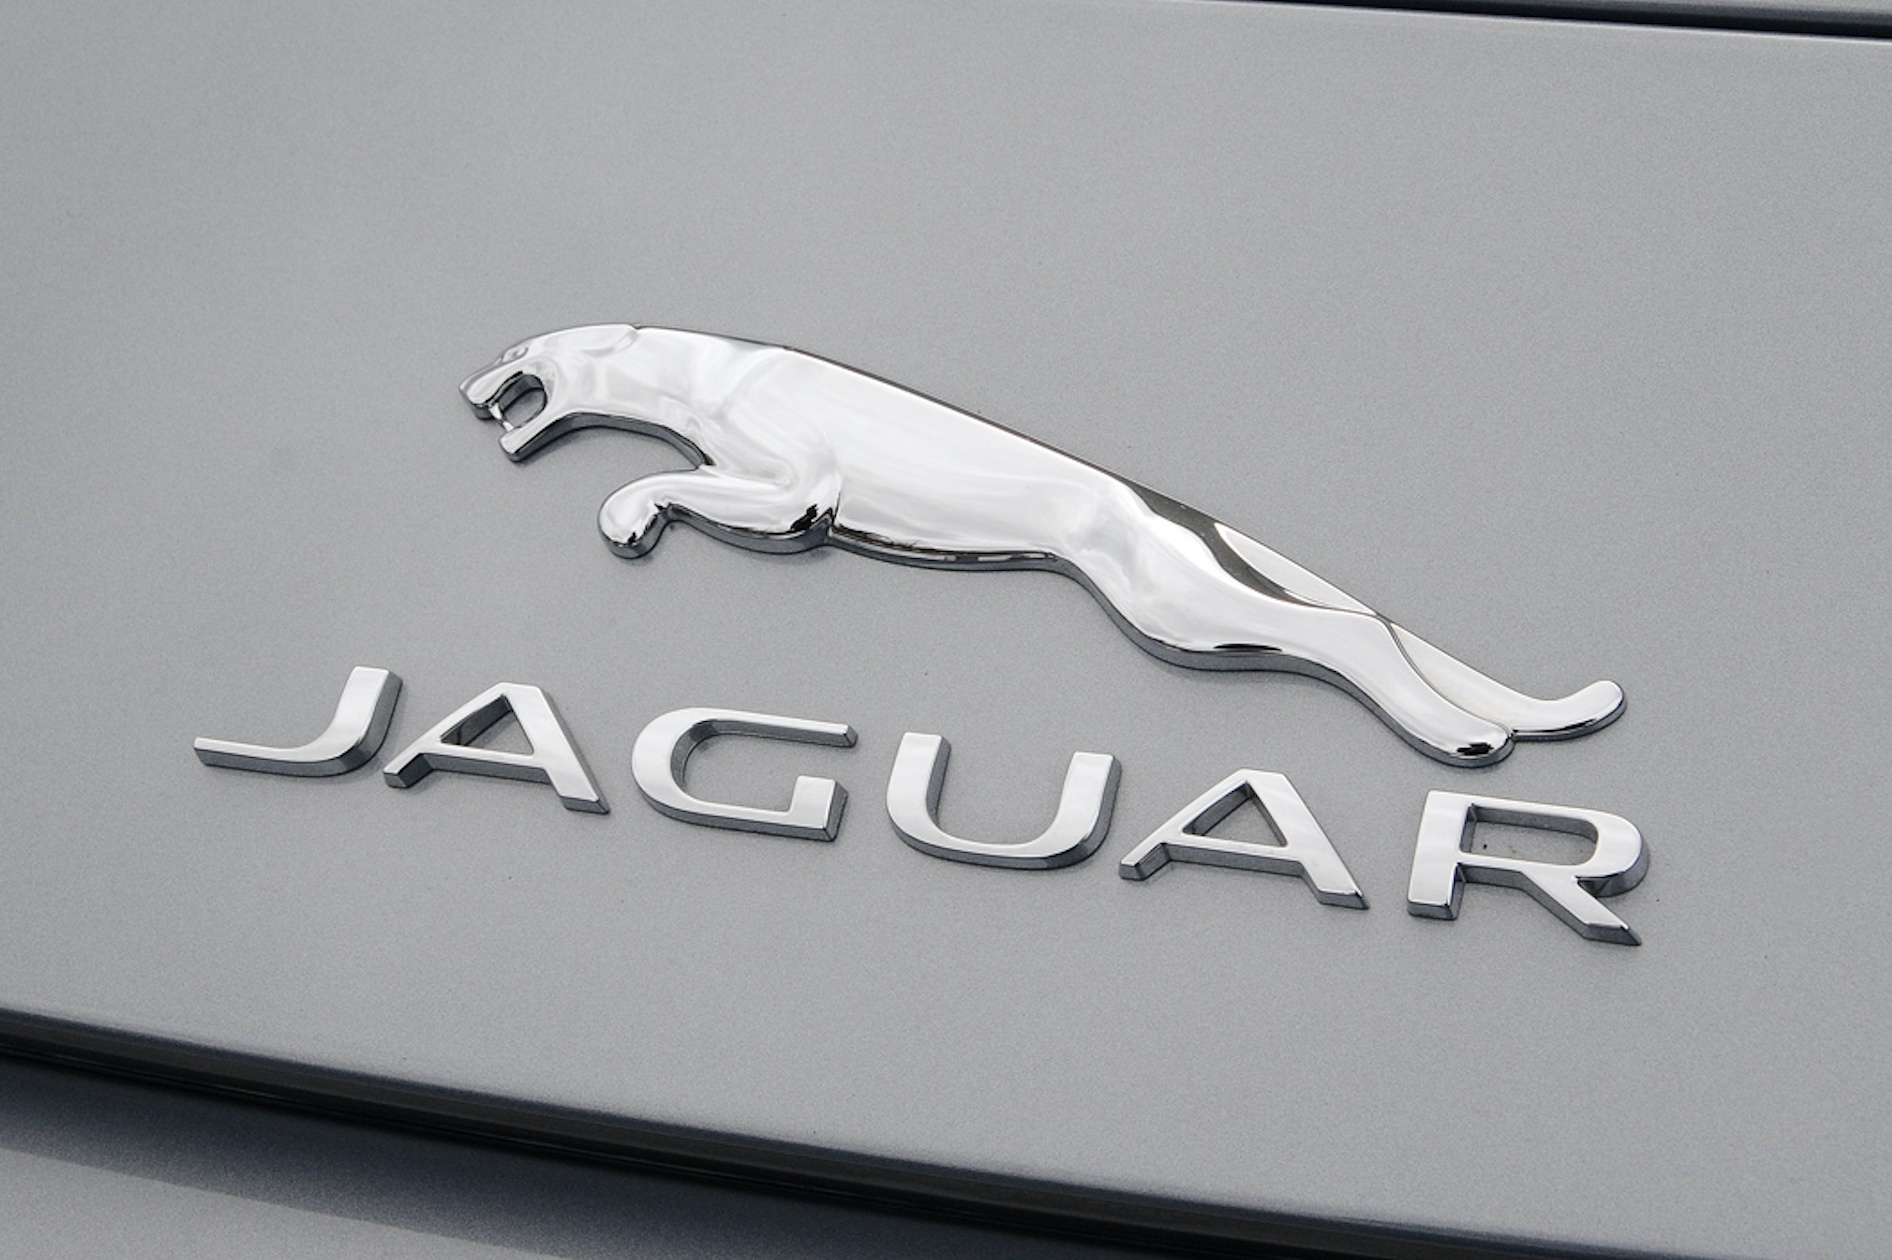 Exclusive: Jaguar’s luxury reinvention to start from $200k - Automotive